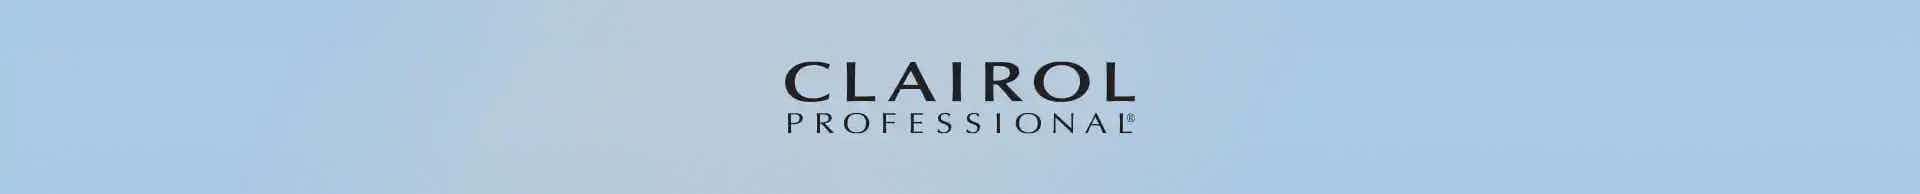 Clairol Professional Banner